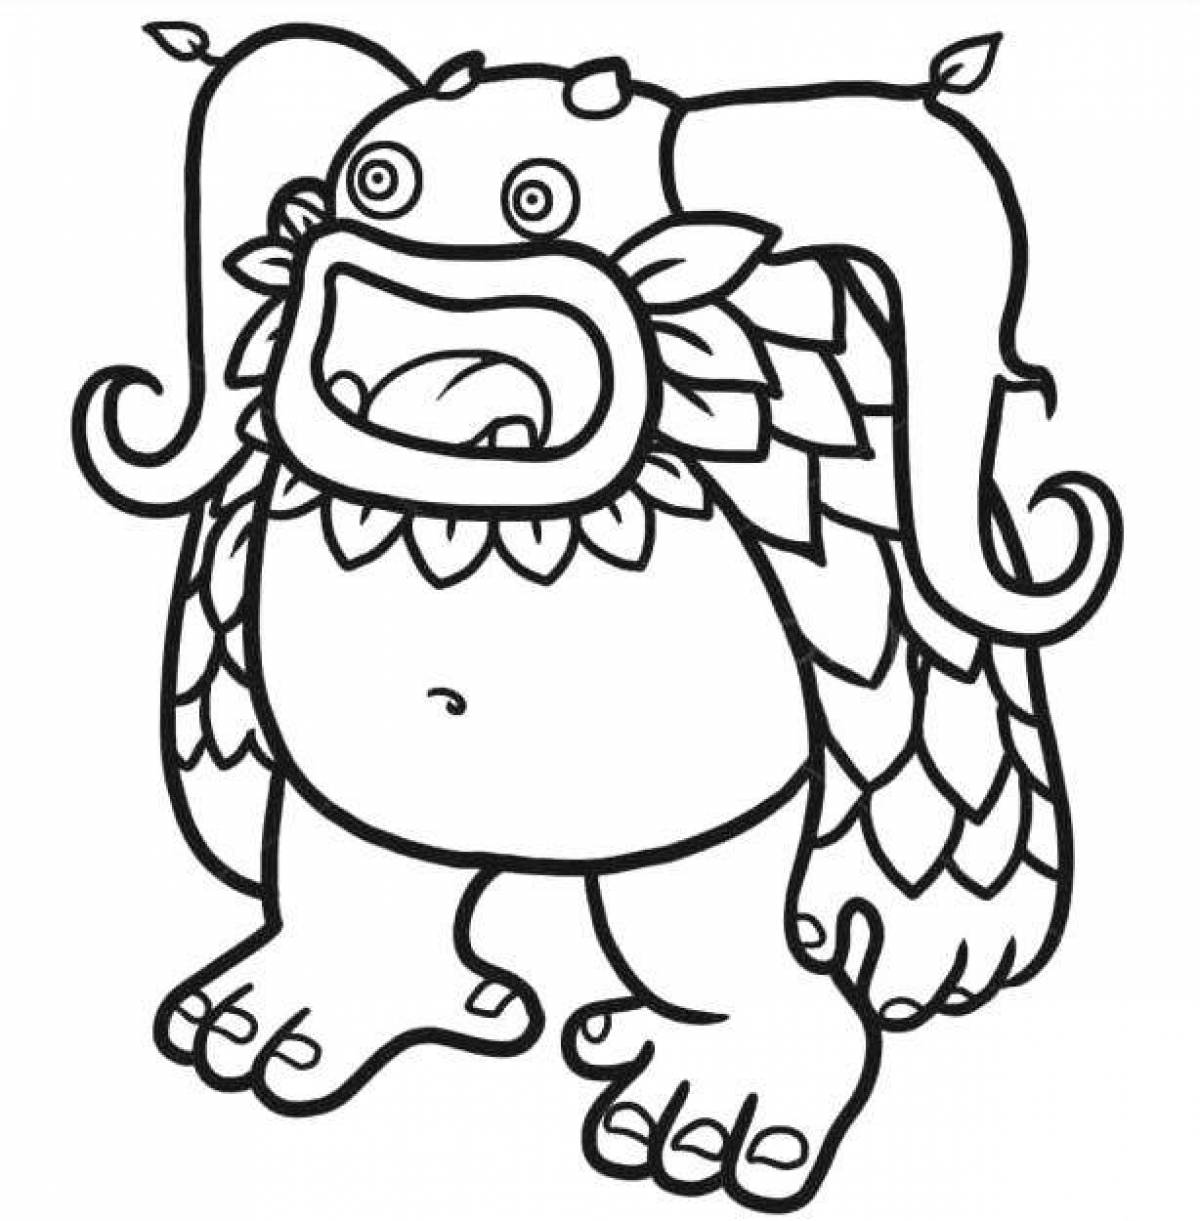 Coloring page exotic singing monster May